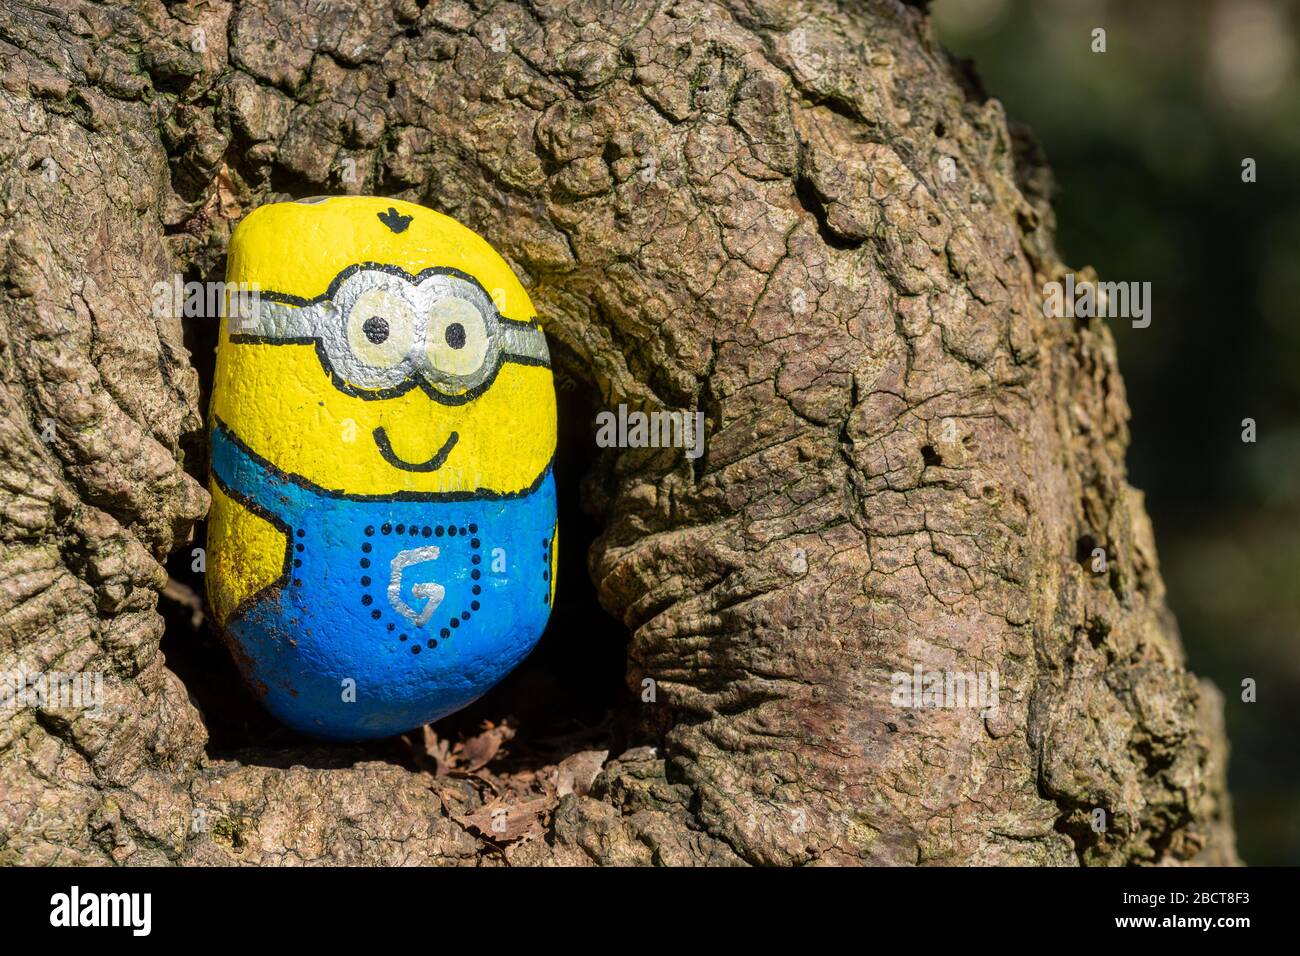 The kindness rocks project, a pebble painted as one of the minions characters (Bob) from the Despicable Me movie franchise, in a tree hole, UK Stock Photo